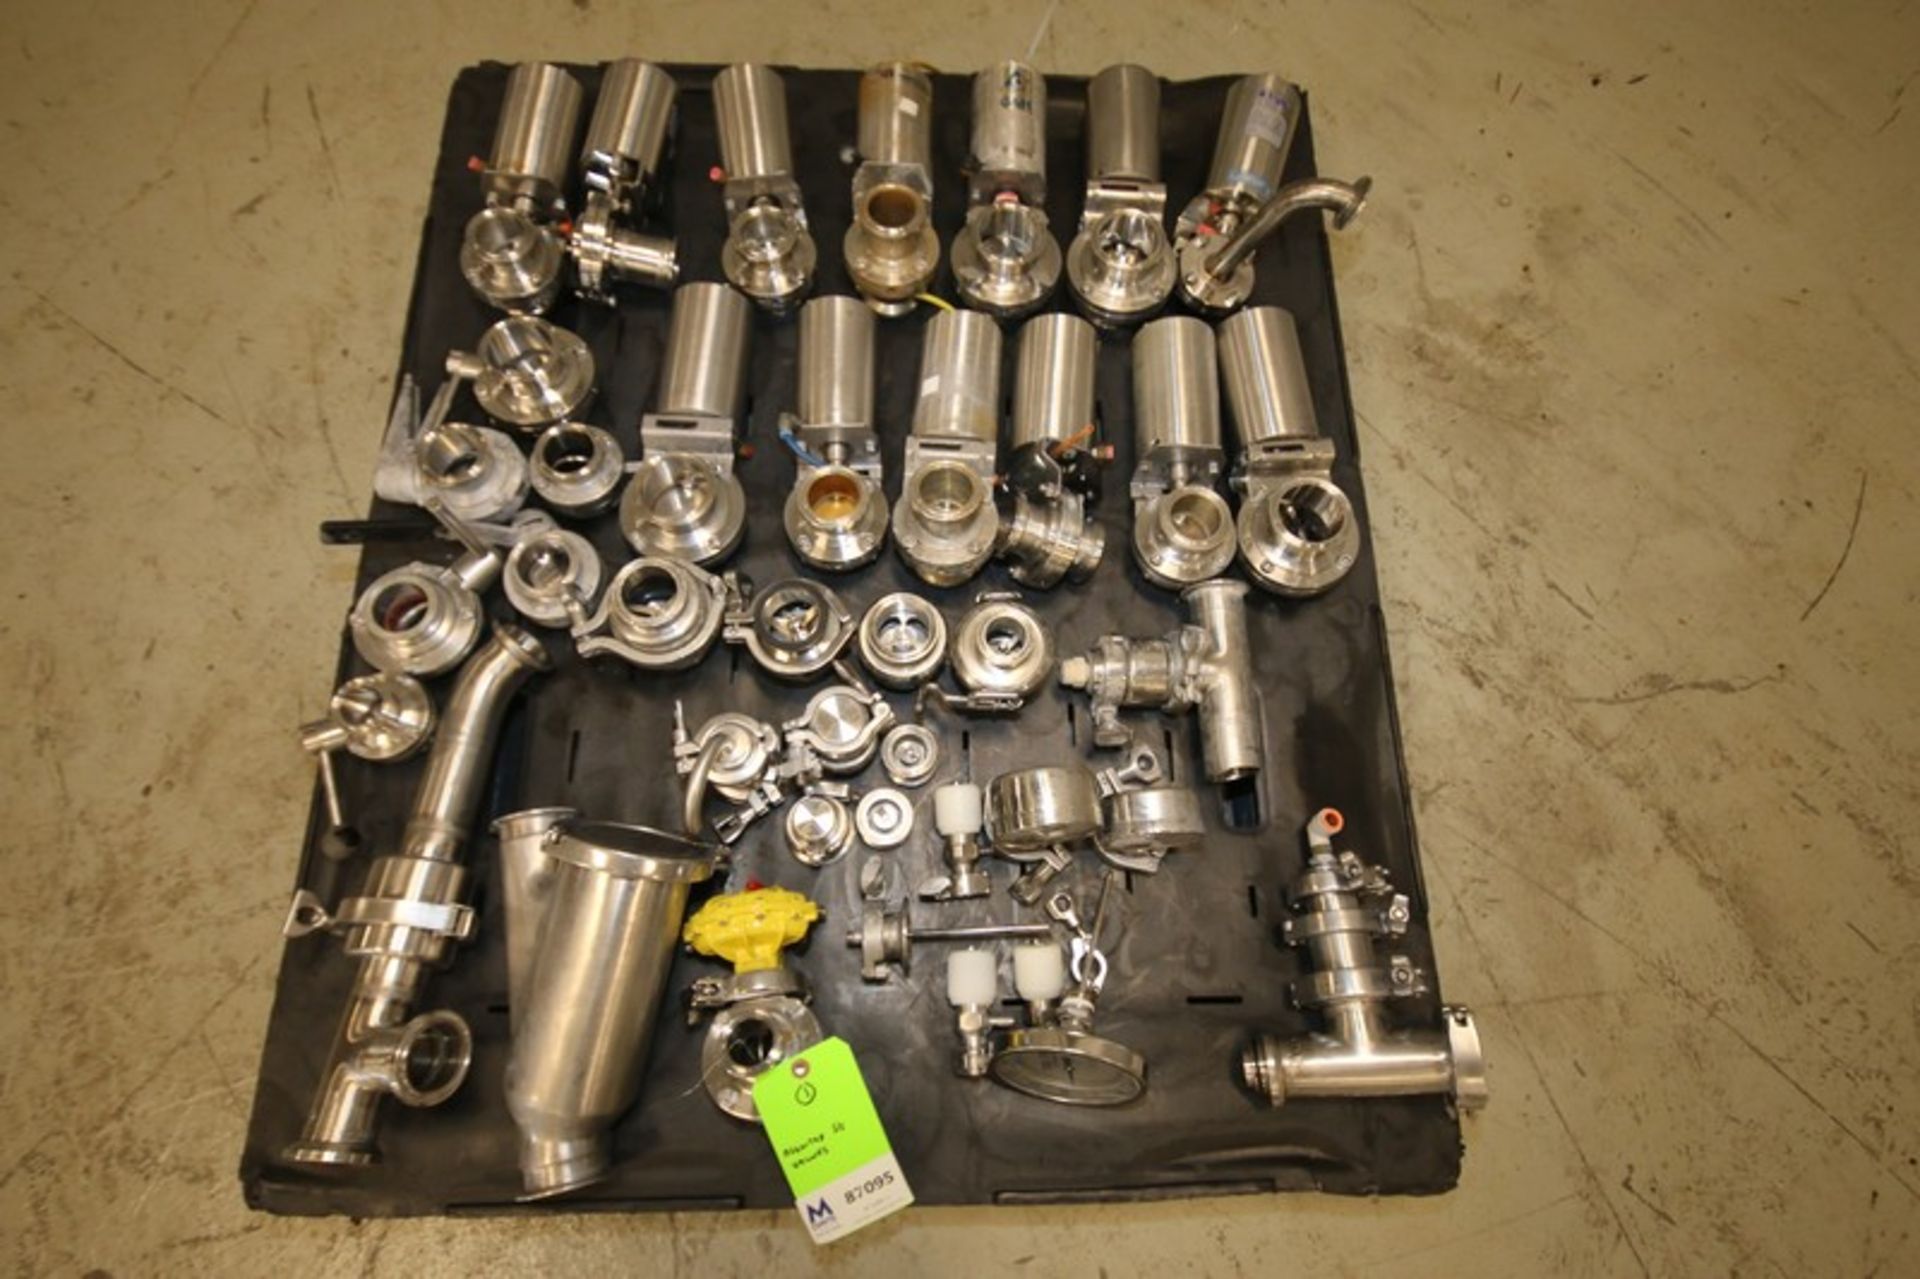 Lot of Assorted 1" to 2.5" S/S Valves & Fitting Including Check Valves, butterfly Valves, Metering - Image 2 of 2